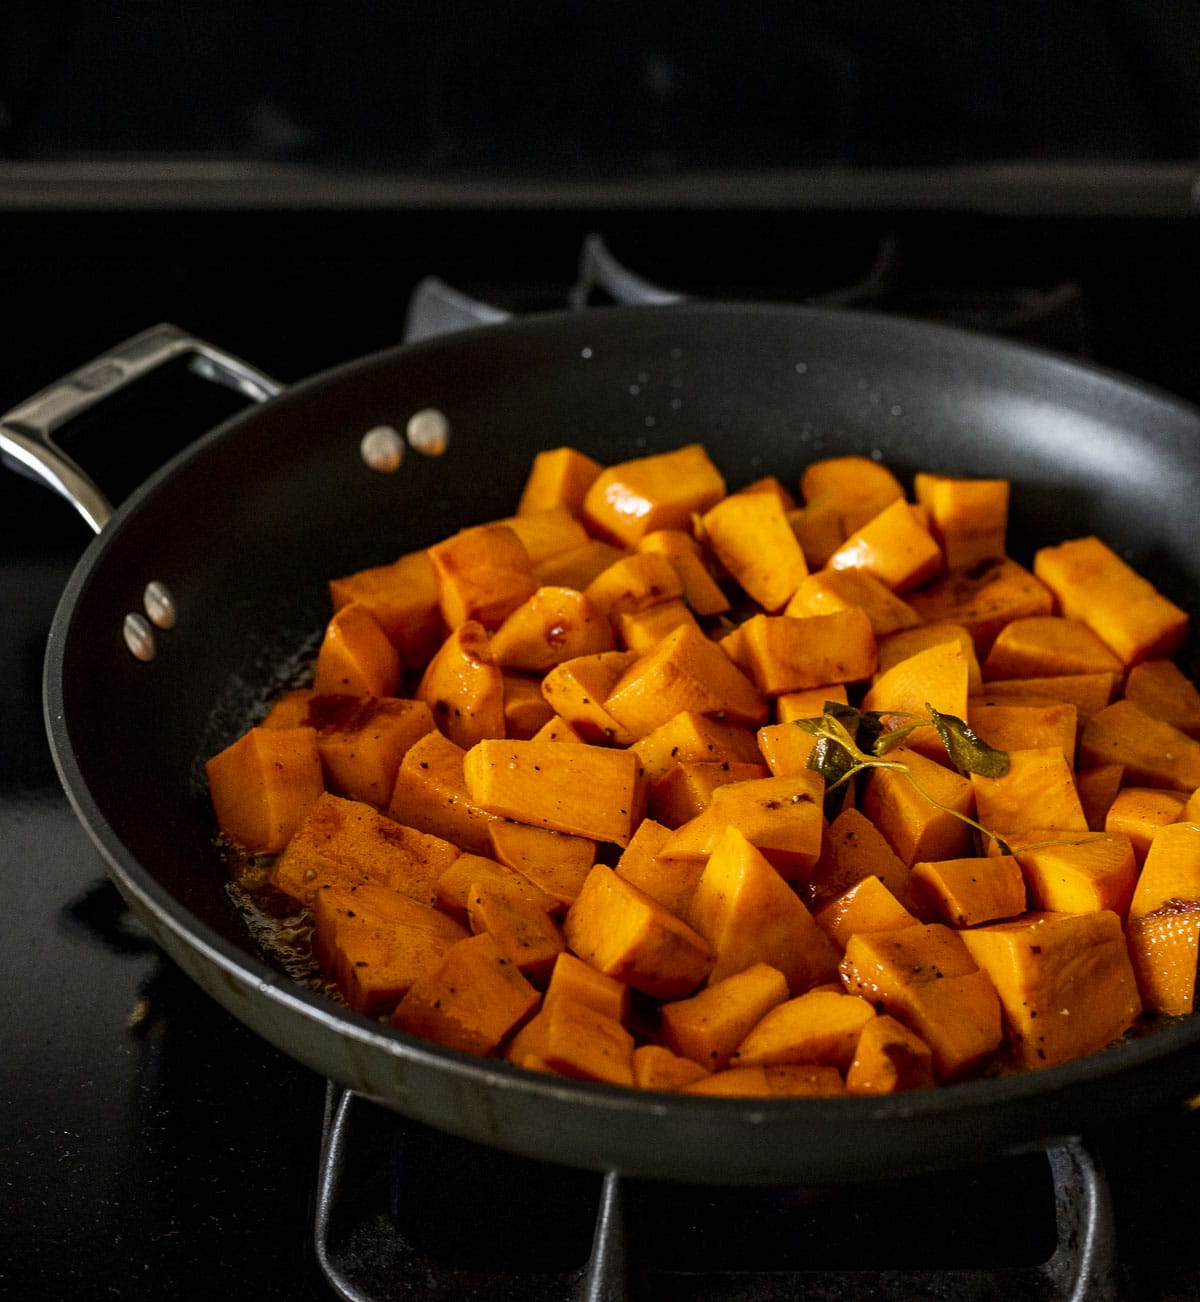 Sous vide sweet potato cubes being browned in a skillet on the stovetop.